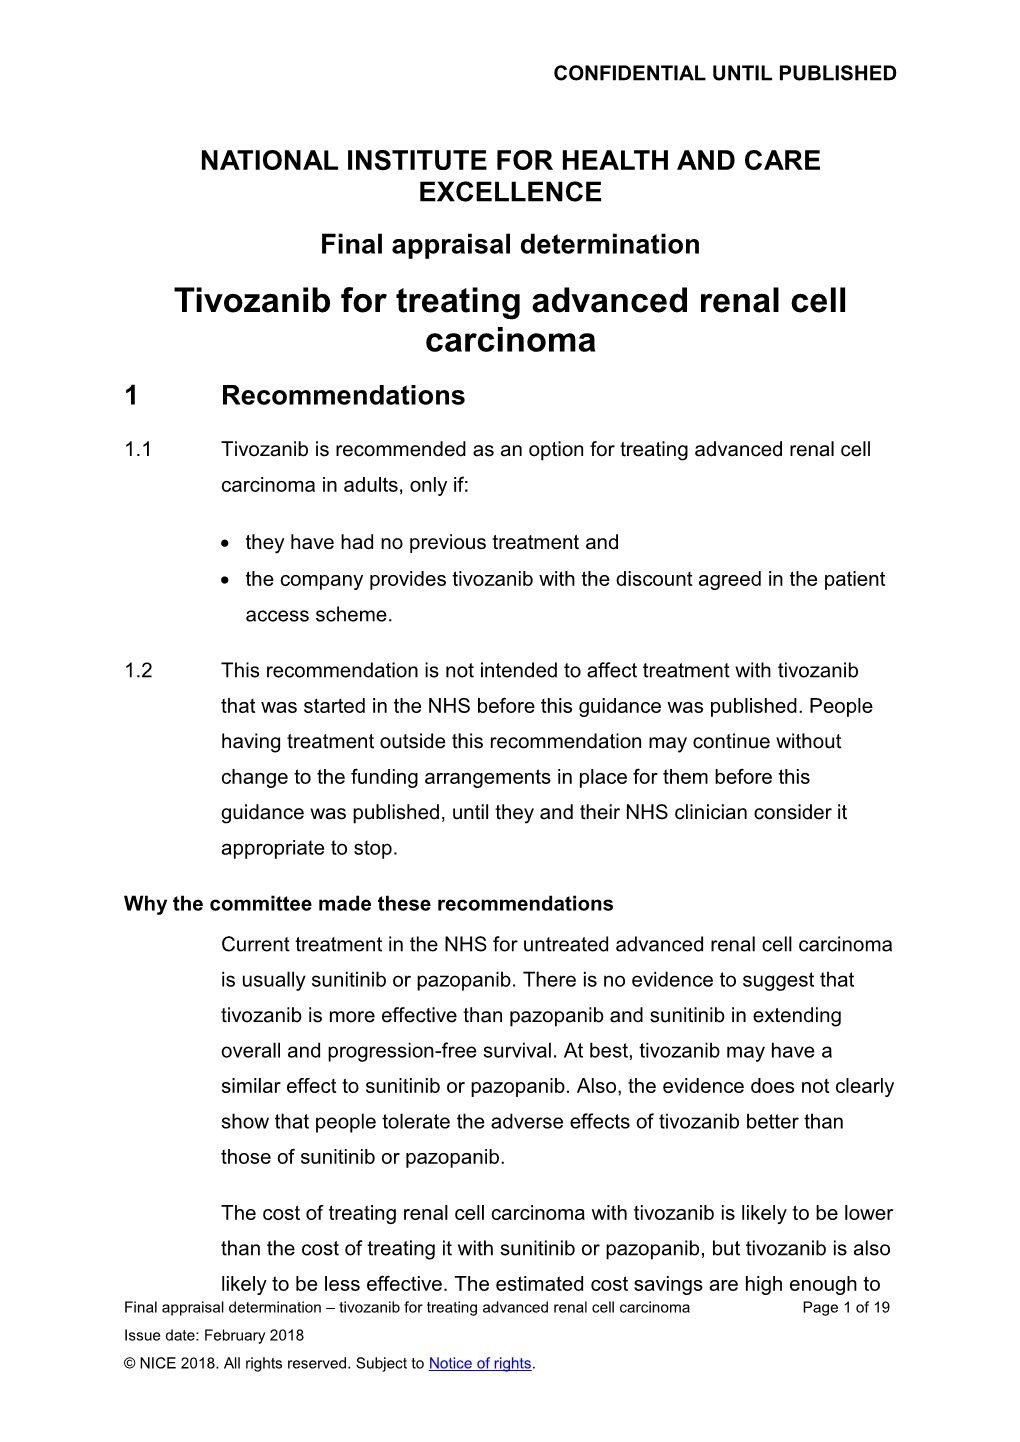 Tivozanib for Treating Advanced Renal Cell Carcinoma 1 Recommendations